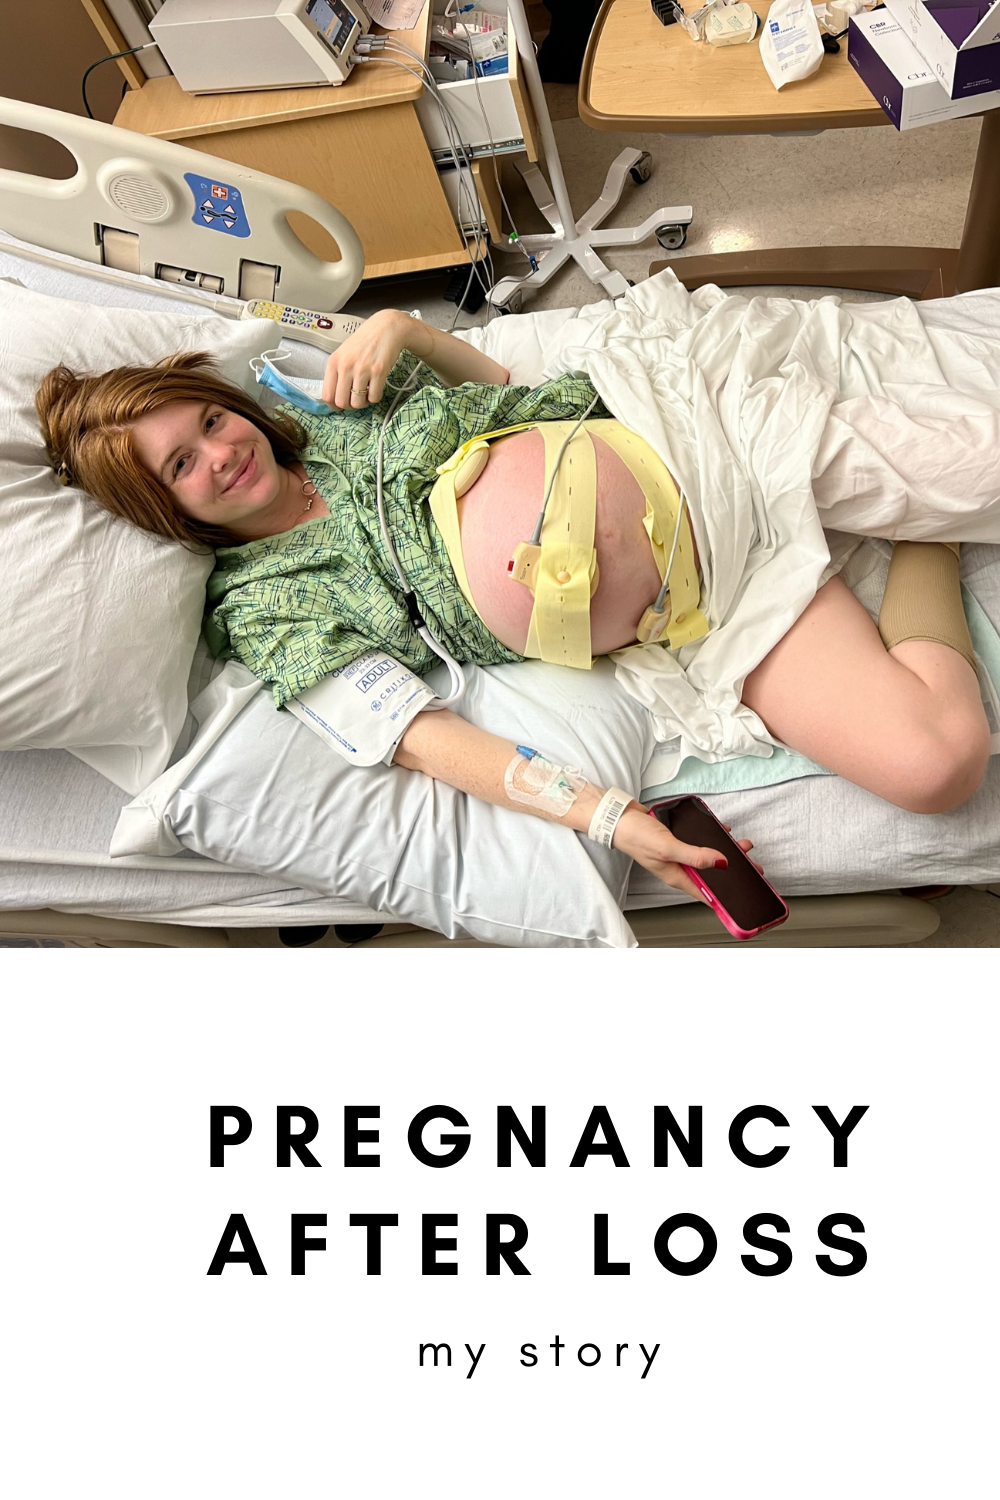 pregnancy after loss, twin pregnancy, rainbow baby, lments of style, pregnancy anxiety, la blogger, twin mom, pregnancy after loss awareness month, rainbow baby, babies